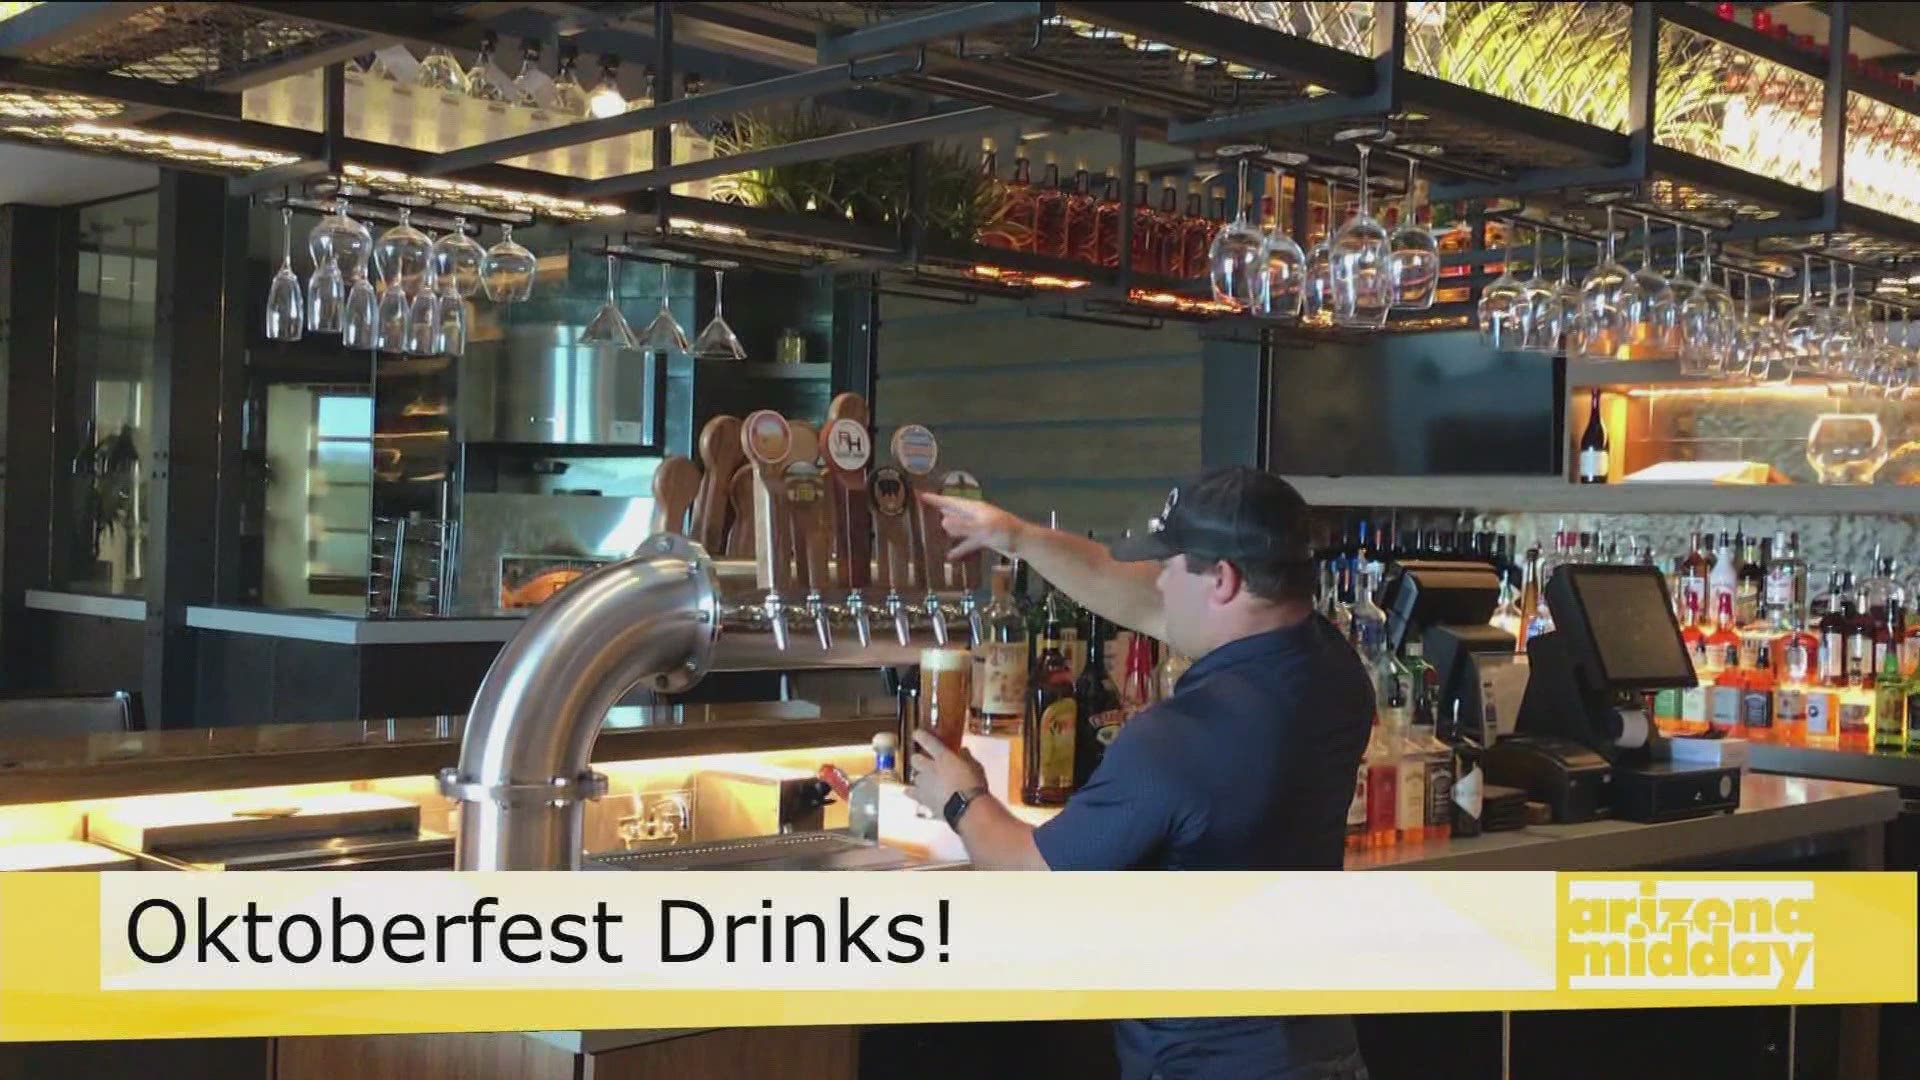 Brewmaster Josh Johnson shows us some of the beer options to try at Ranch House Grill & Brewery to celebrate the German Festival